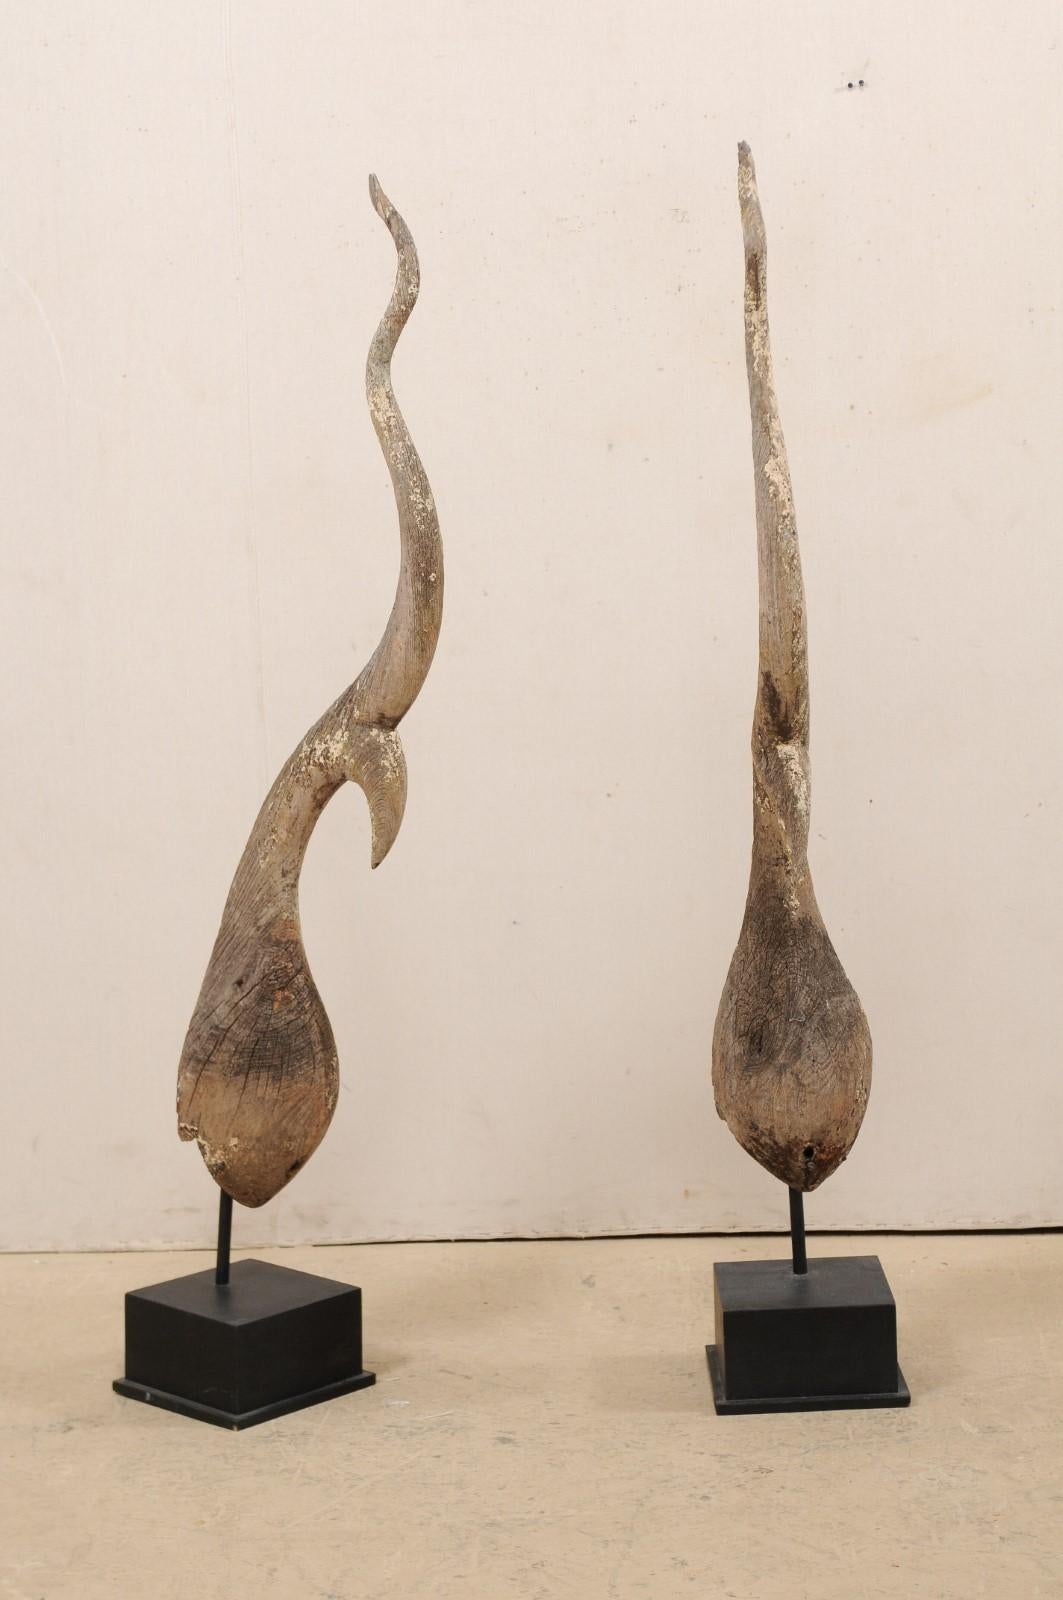 A large-sized pair of antique Chofa temple spires from Thailand, presented on custom wood bases. These elegantly shaped Thai finials, from the late 19th century, are referred to as a 